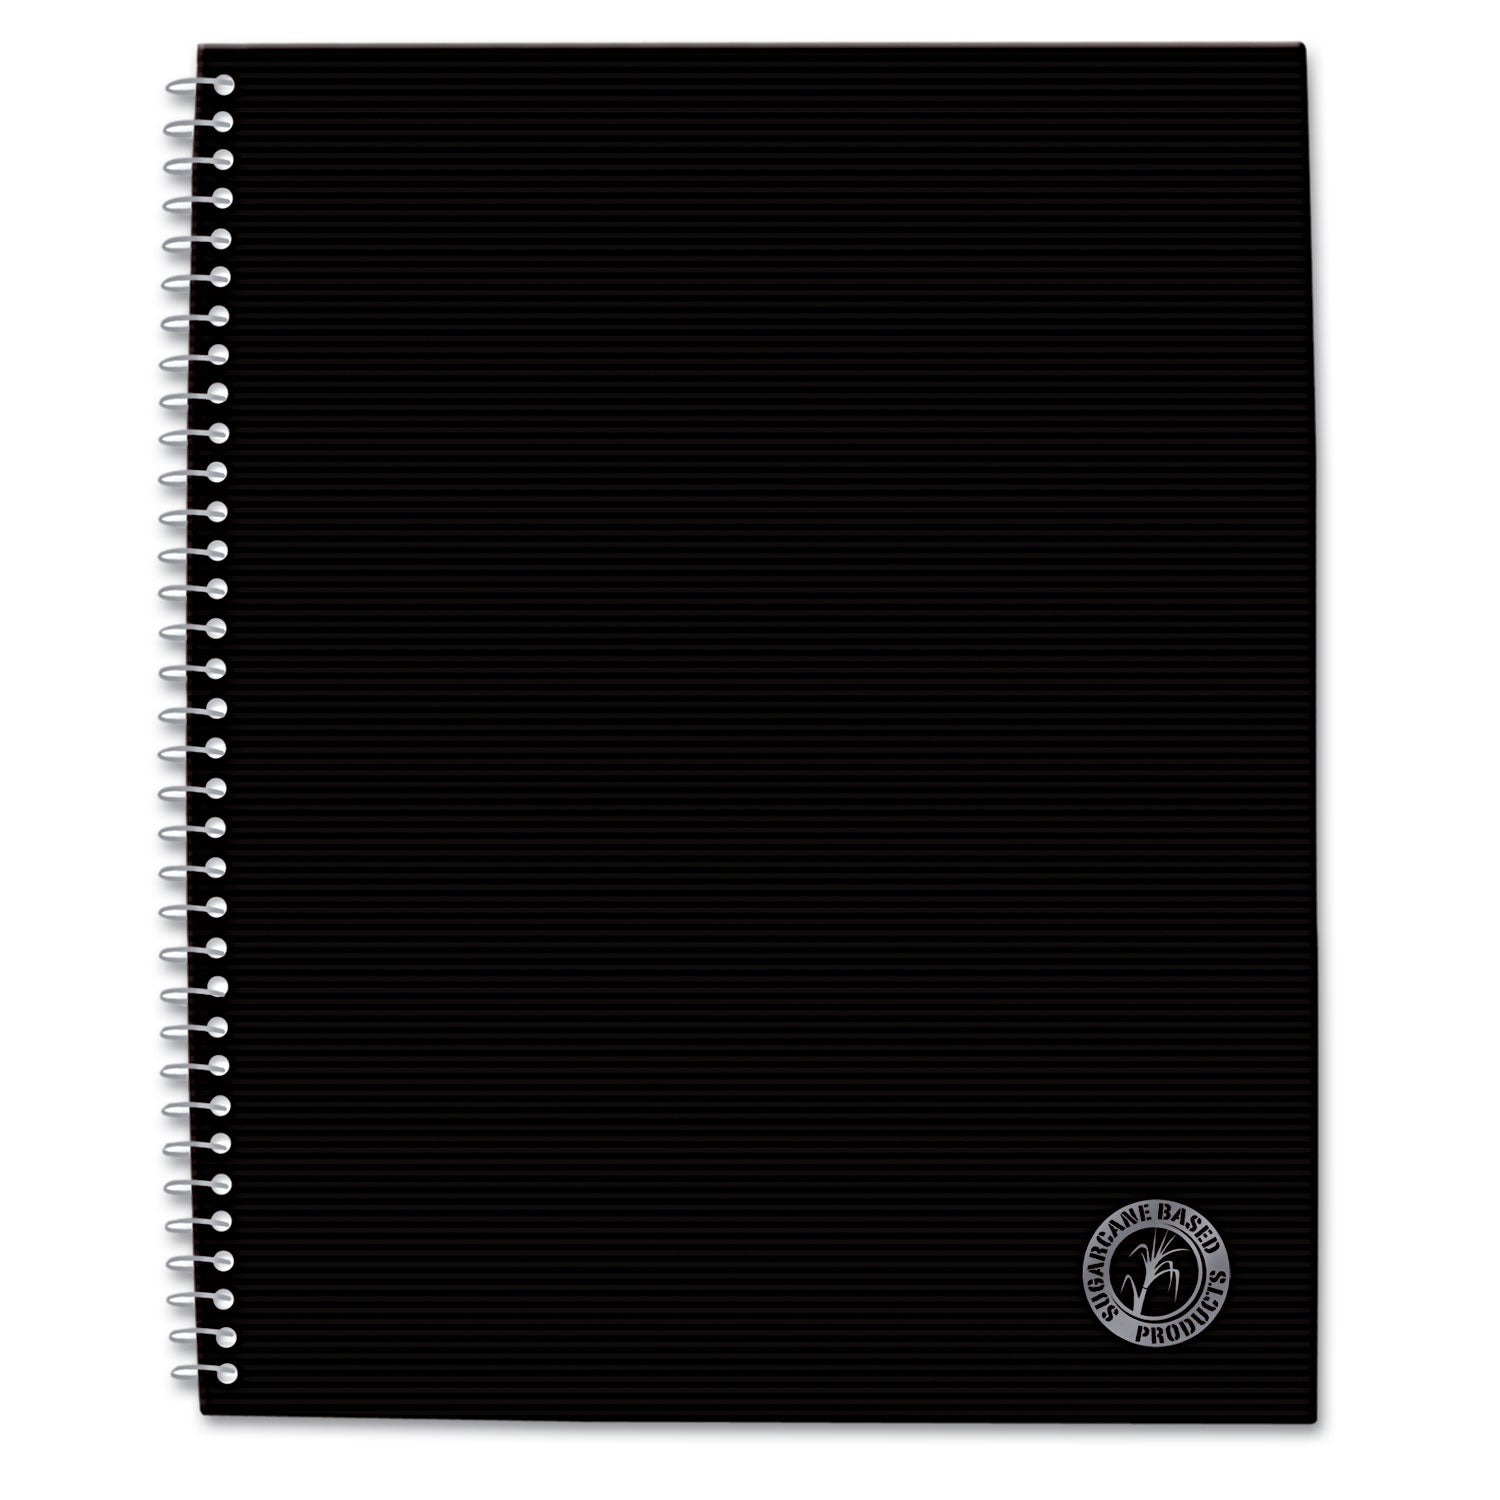 Deluxe Sugarcane Based Notebooks, Coated Bagasse Cover, 1-Subject, Medium/College Rule, Black Cover, (100) 11 x 8.5 Sheets - 